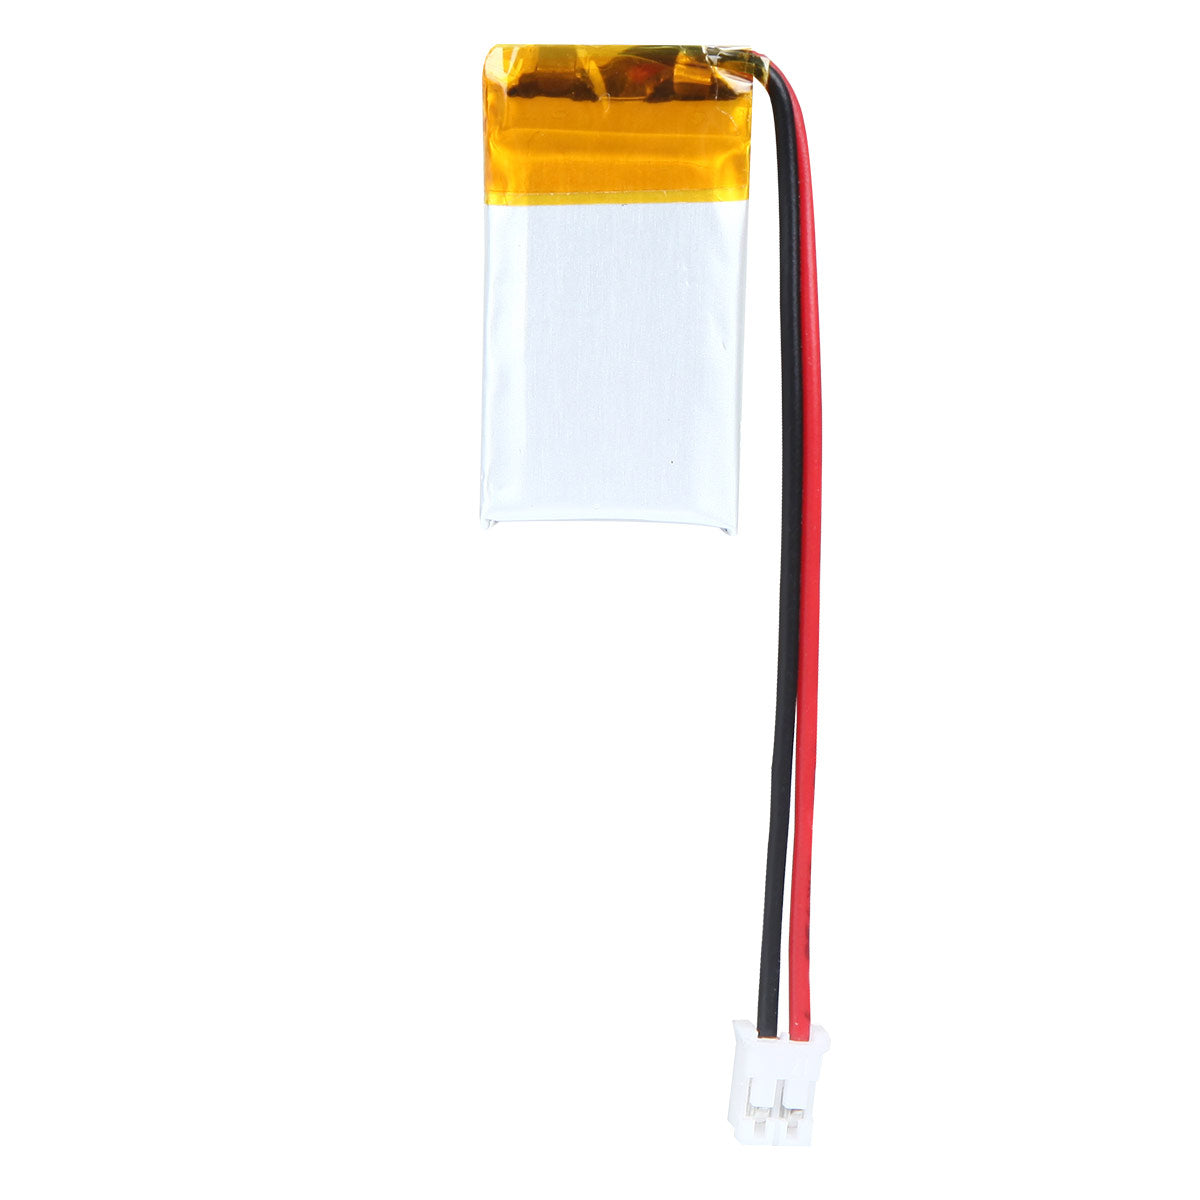 YDL 3.7V 140mAh 501624 Rechargeable Lithium Polymer Battery Length 26mm